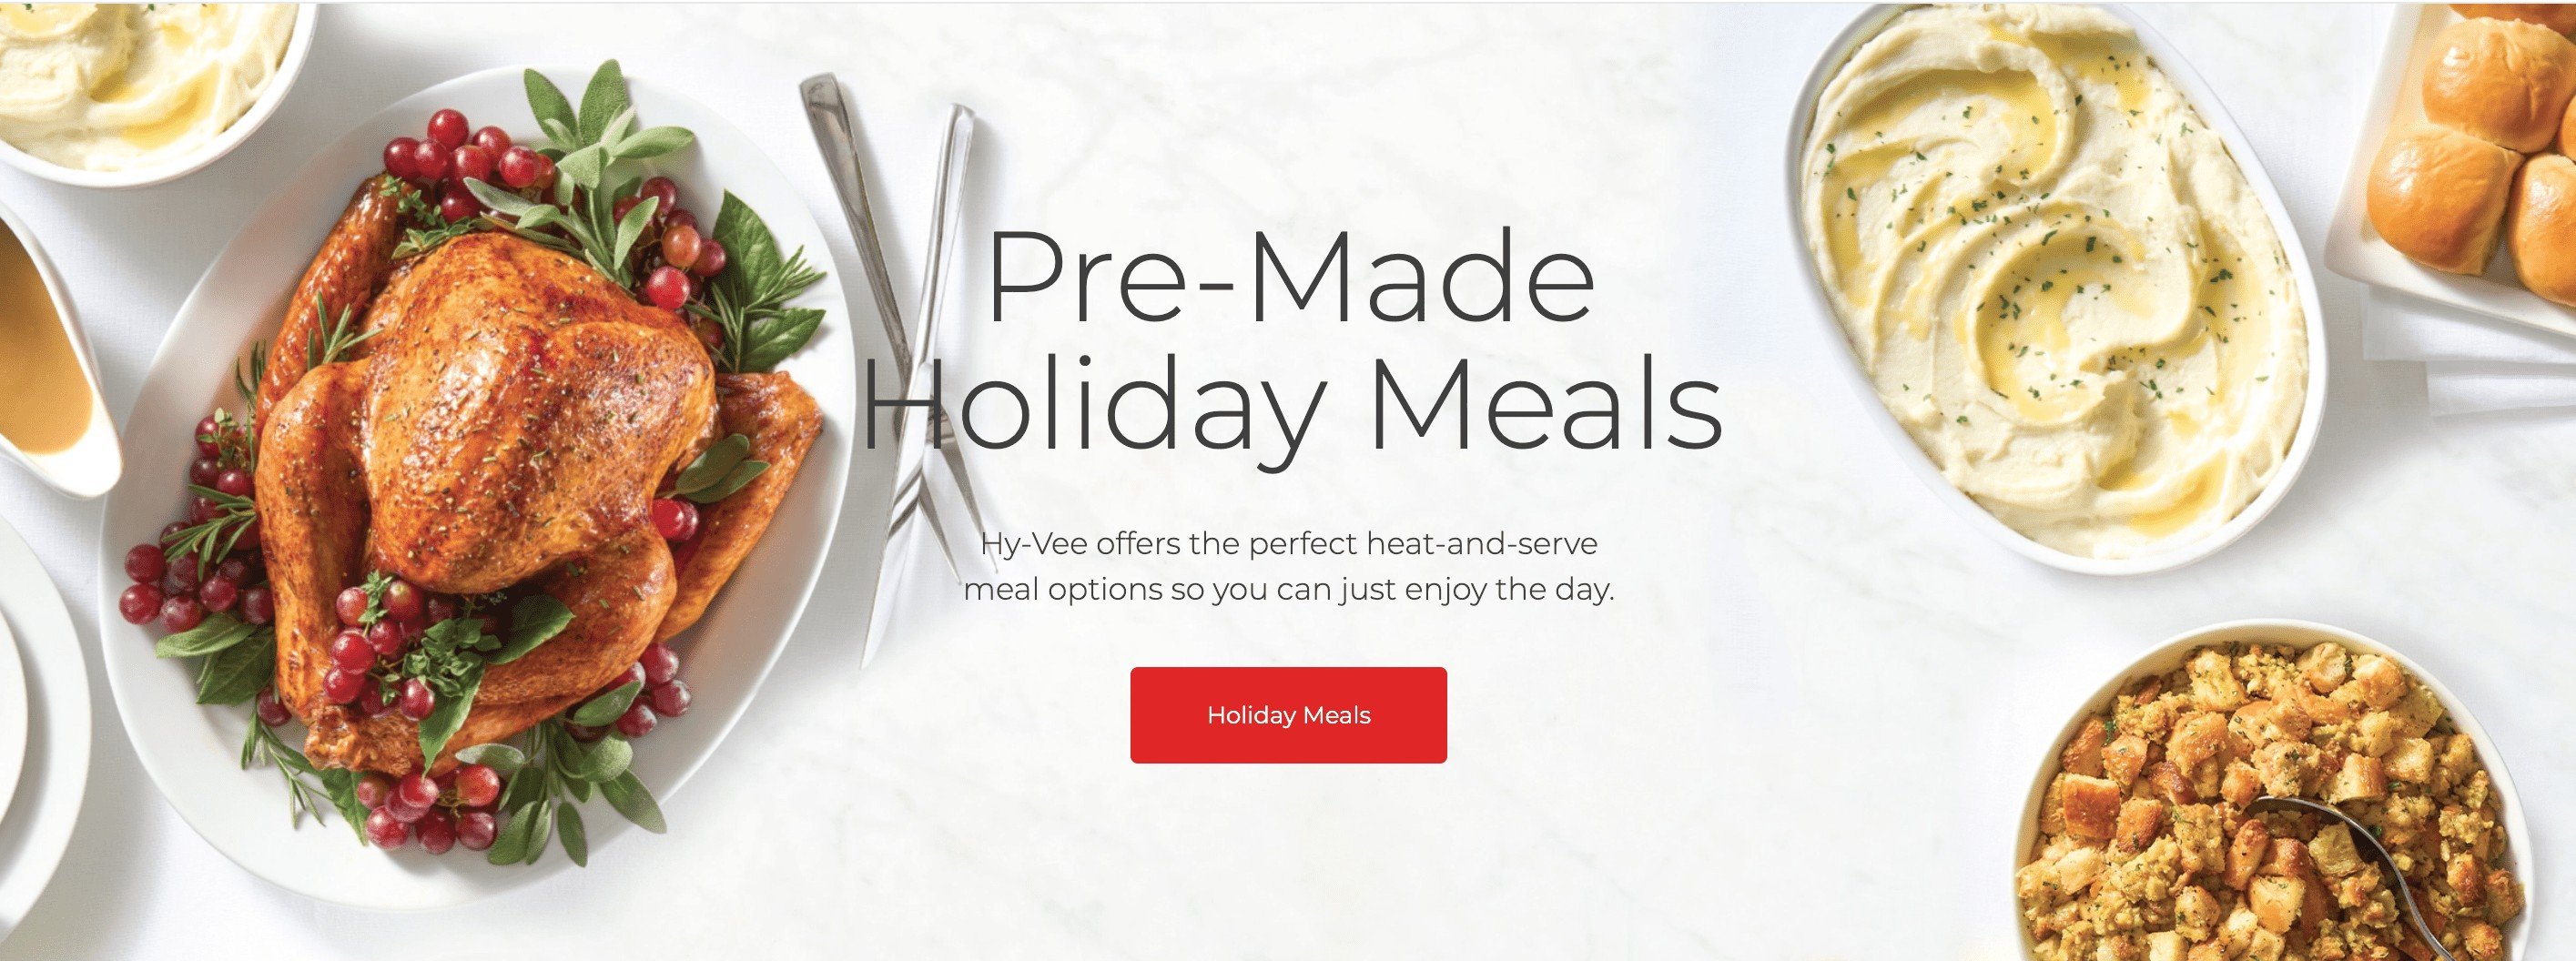 Screen shot of Hy-Vee "pre-made Holiday meals" banner.